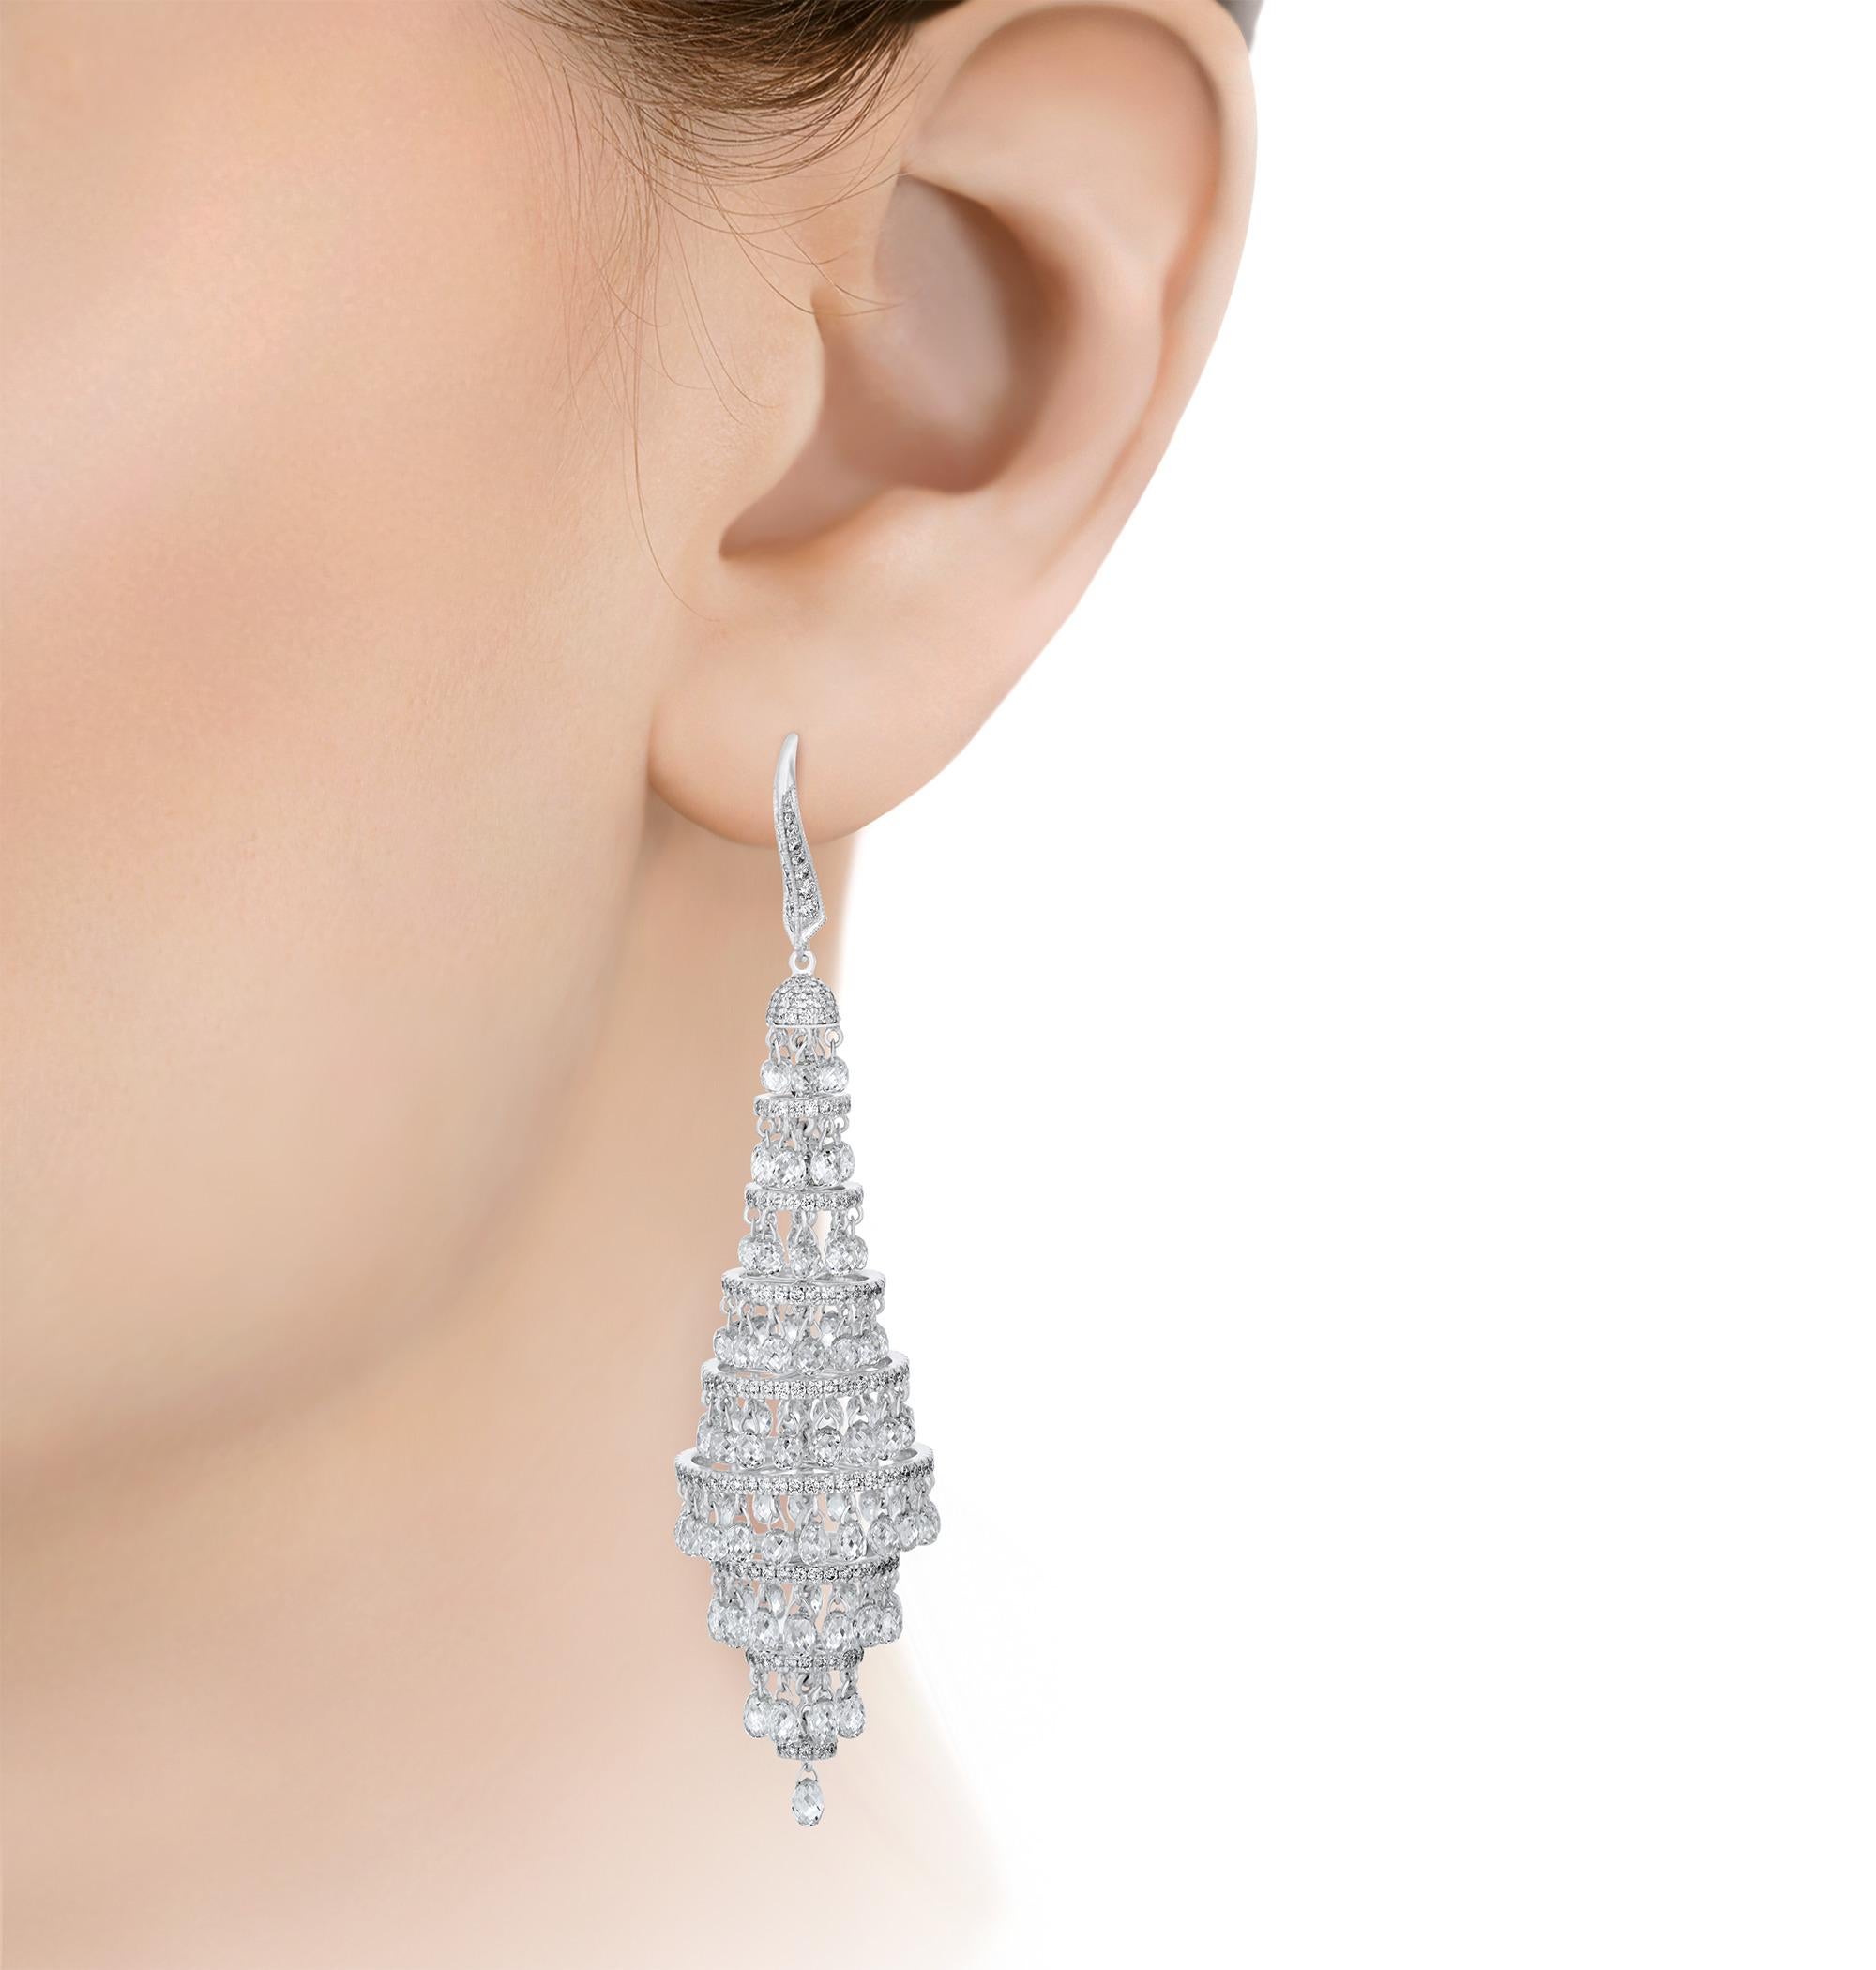 Exuding timeless luxury, this radiant pair of chandelier earrings features an impressive array of briolette-cut diamonds totaling 25.72 carats. The dazzling stones artfully cascade in a lustrous 18K white gold setting. Sophisticated and elegant,